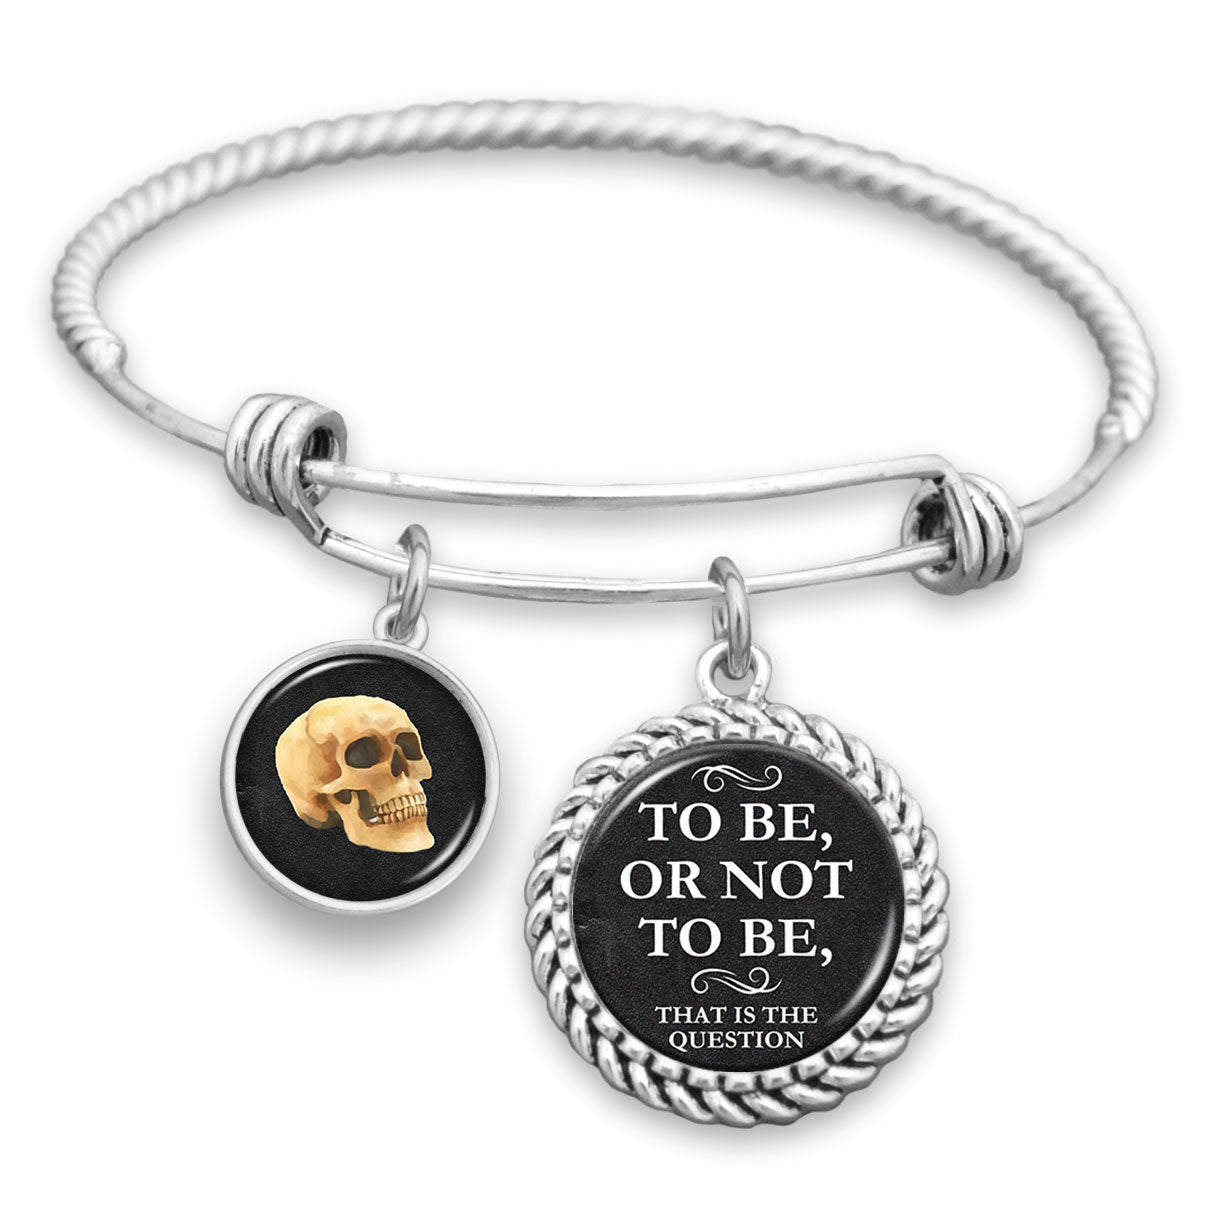 To Be Or Not To Be Charm Bracelet